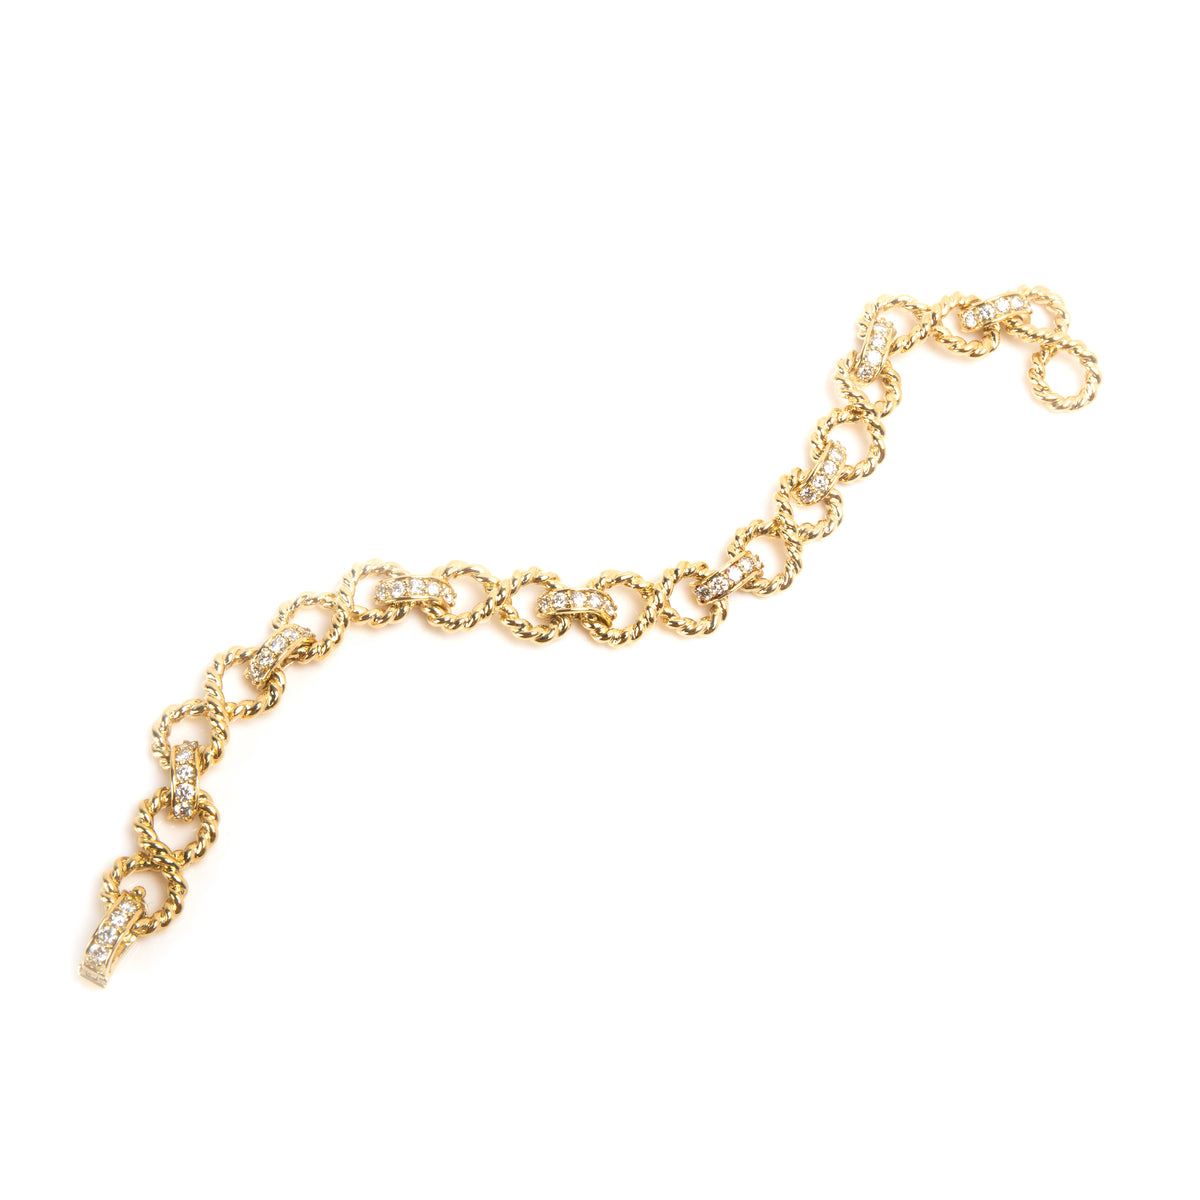 Tiffany & Co Vintage Twisted Rope Infinity Diamond Bracelet in 18KT Gold 2.20ctw